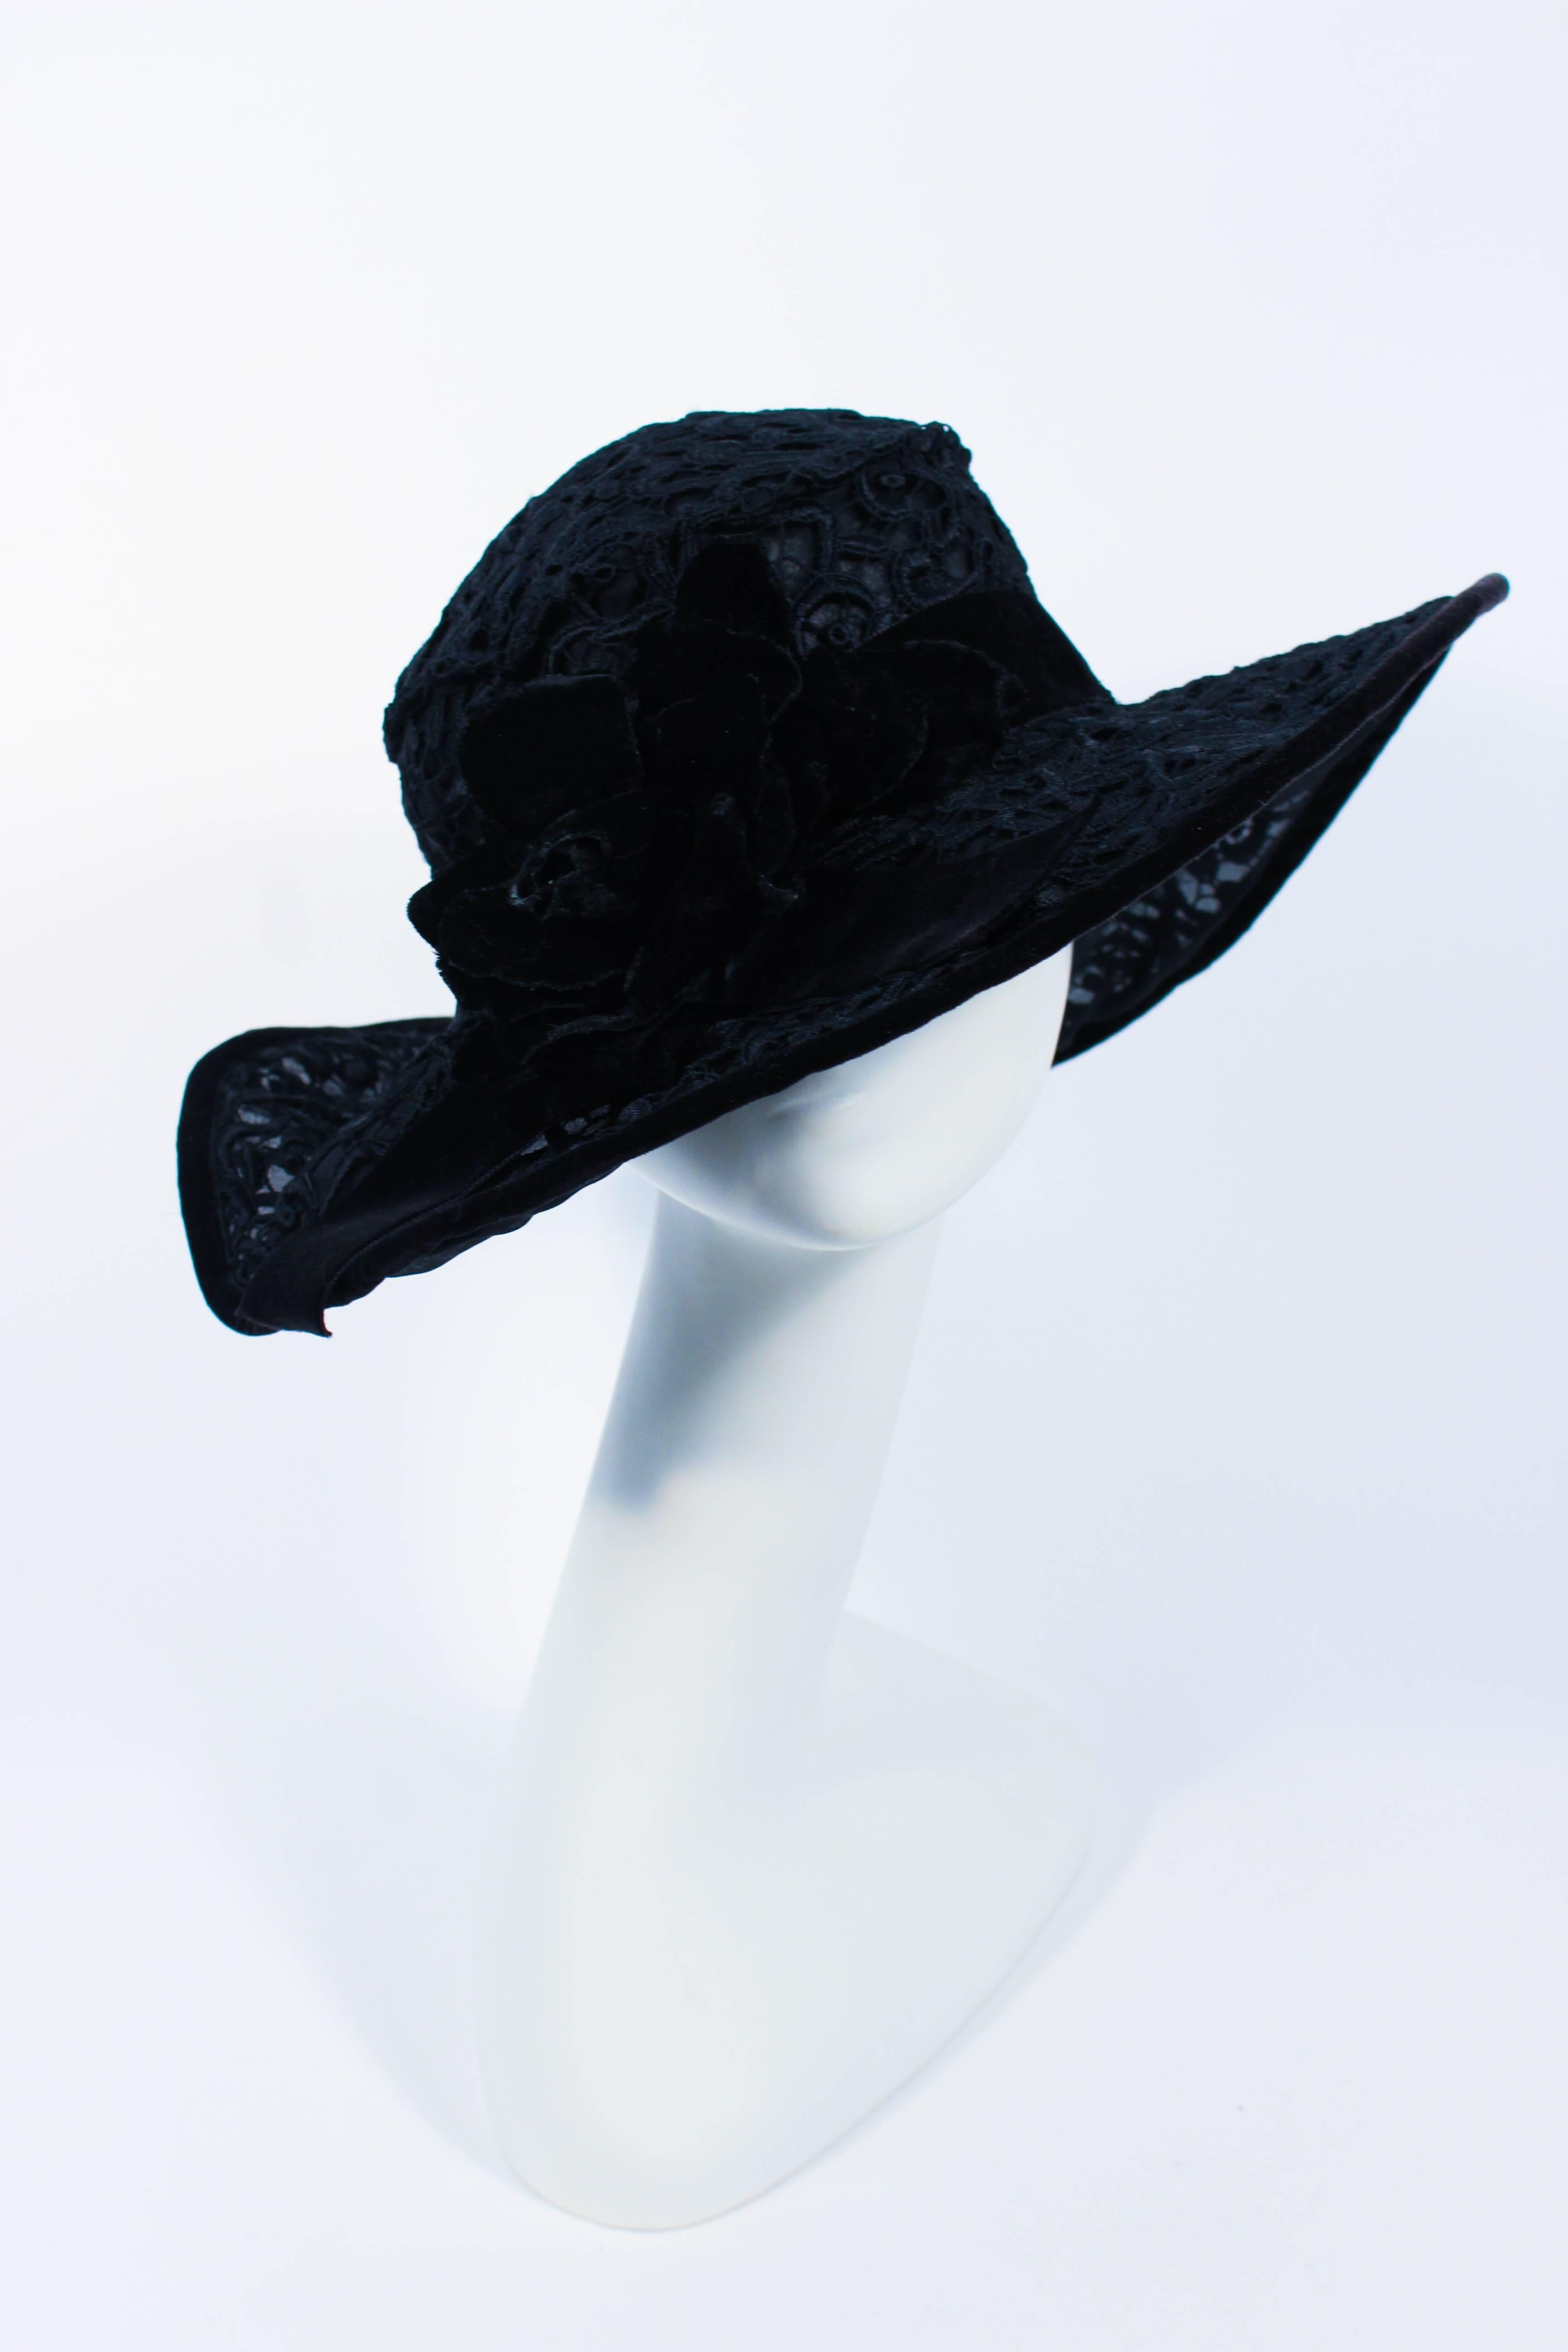 This hat is composed of black velvet and silk. Features a floral pattern. A beautiful and chic design. In excellent vintage condition.

**Please cross-reference measurements for personal accuracy. Size in description box is an estimation. 

Measures